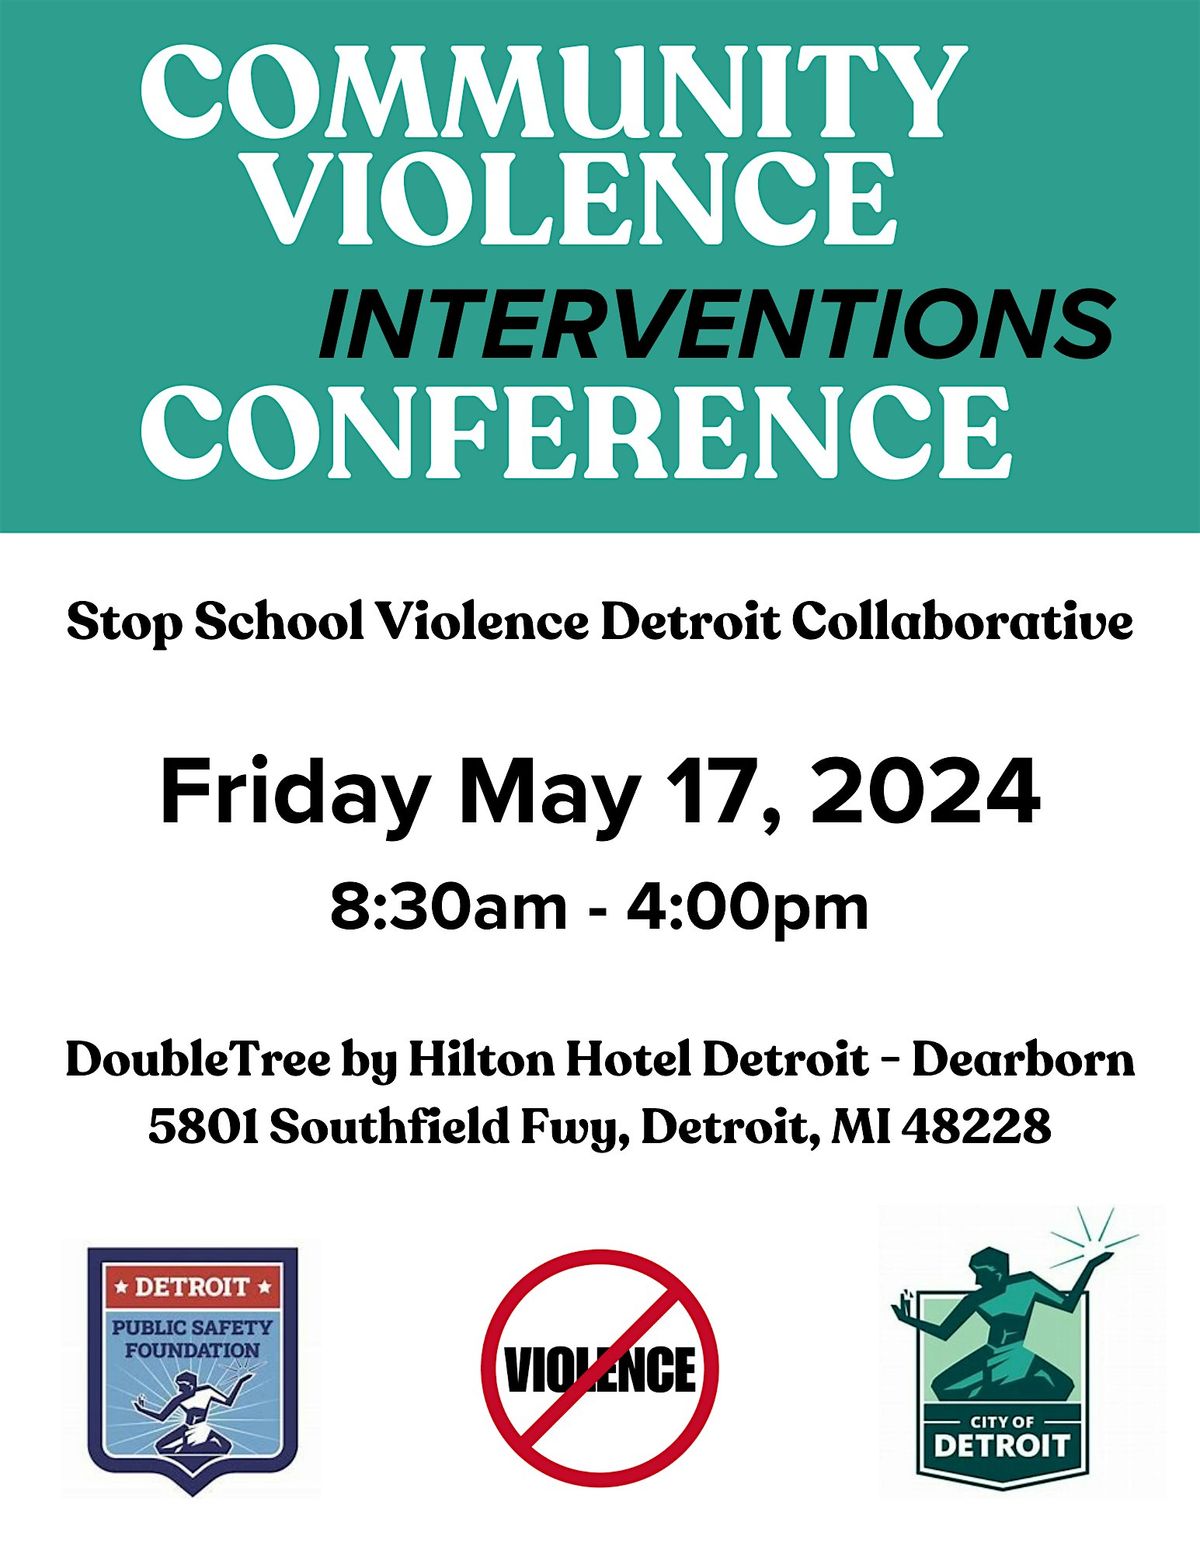 Community Violence Interventions Conference